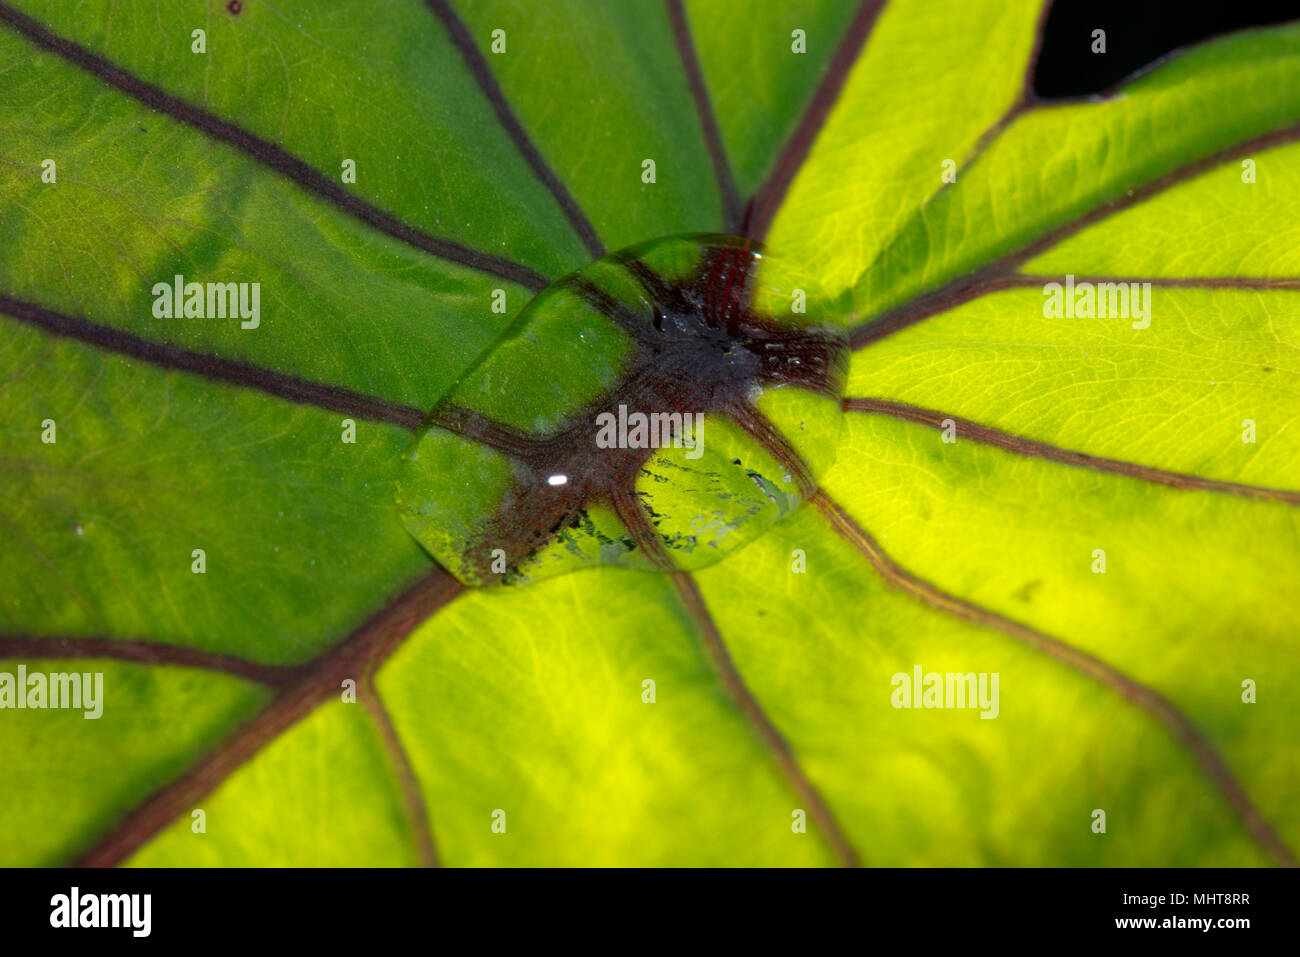 Large water drop sitting on and repelled by the waxy surface of a backlit taro leaf, Colocasia esculenta Stock Photo